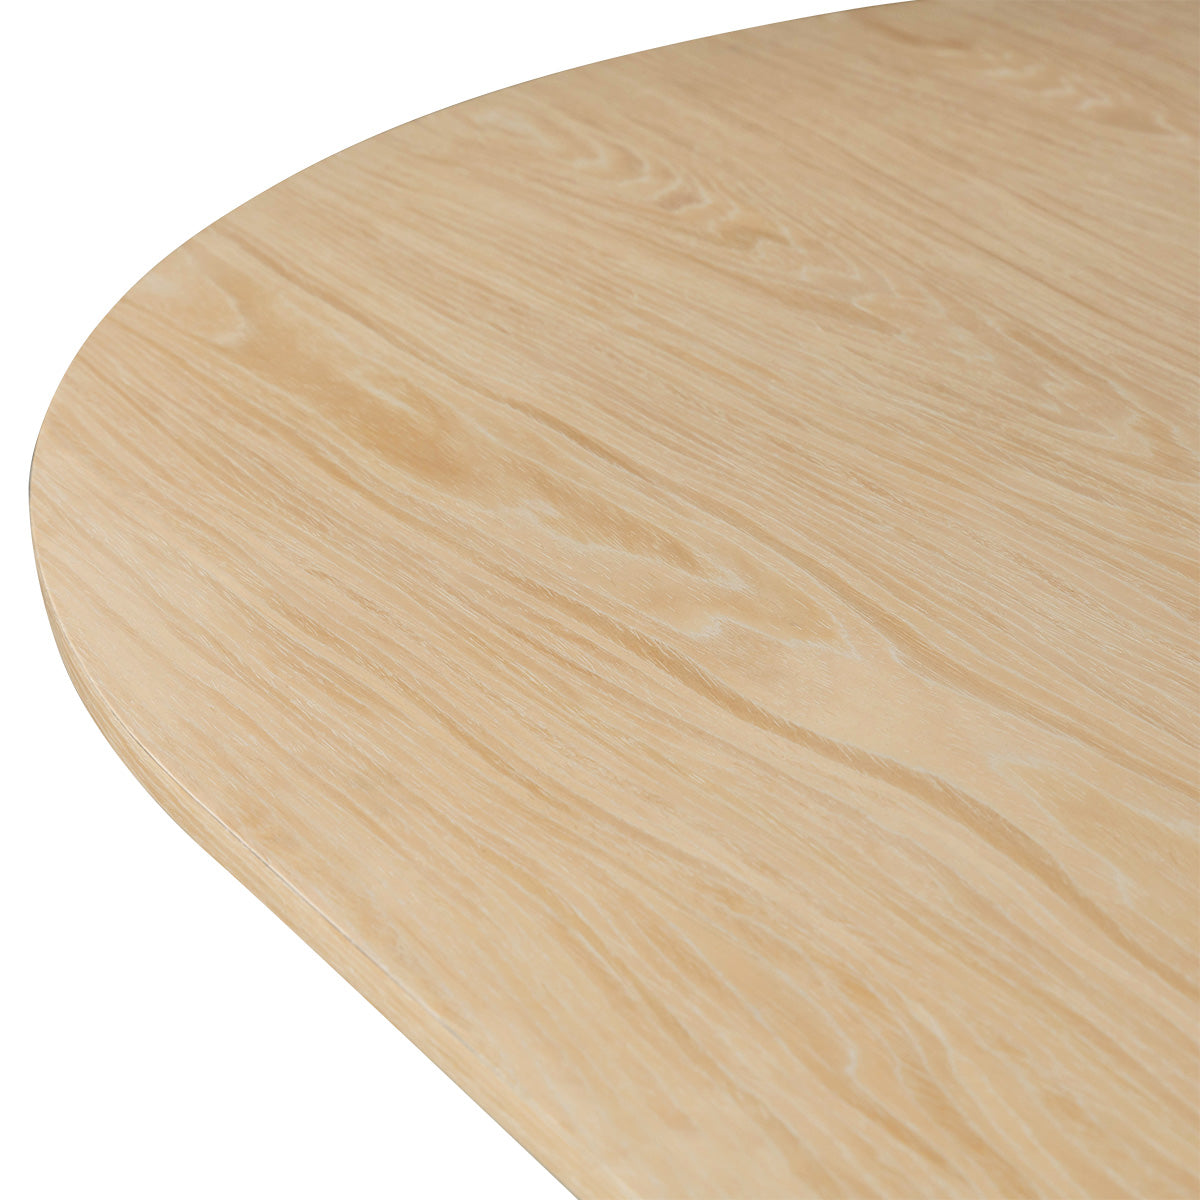 Eden Rock Racetrack Dining Table in White Washed Oak